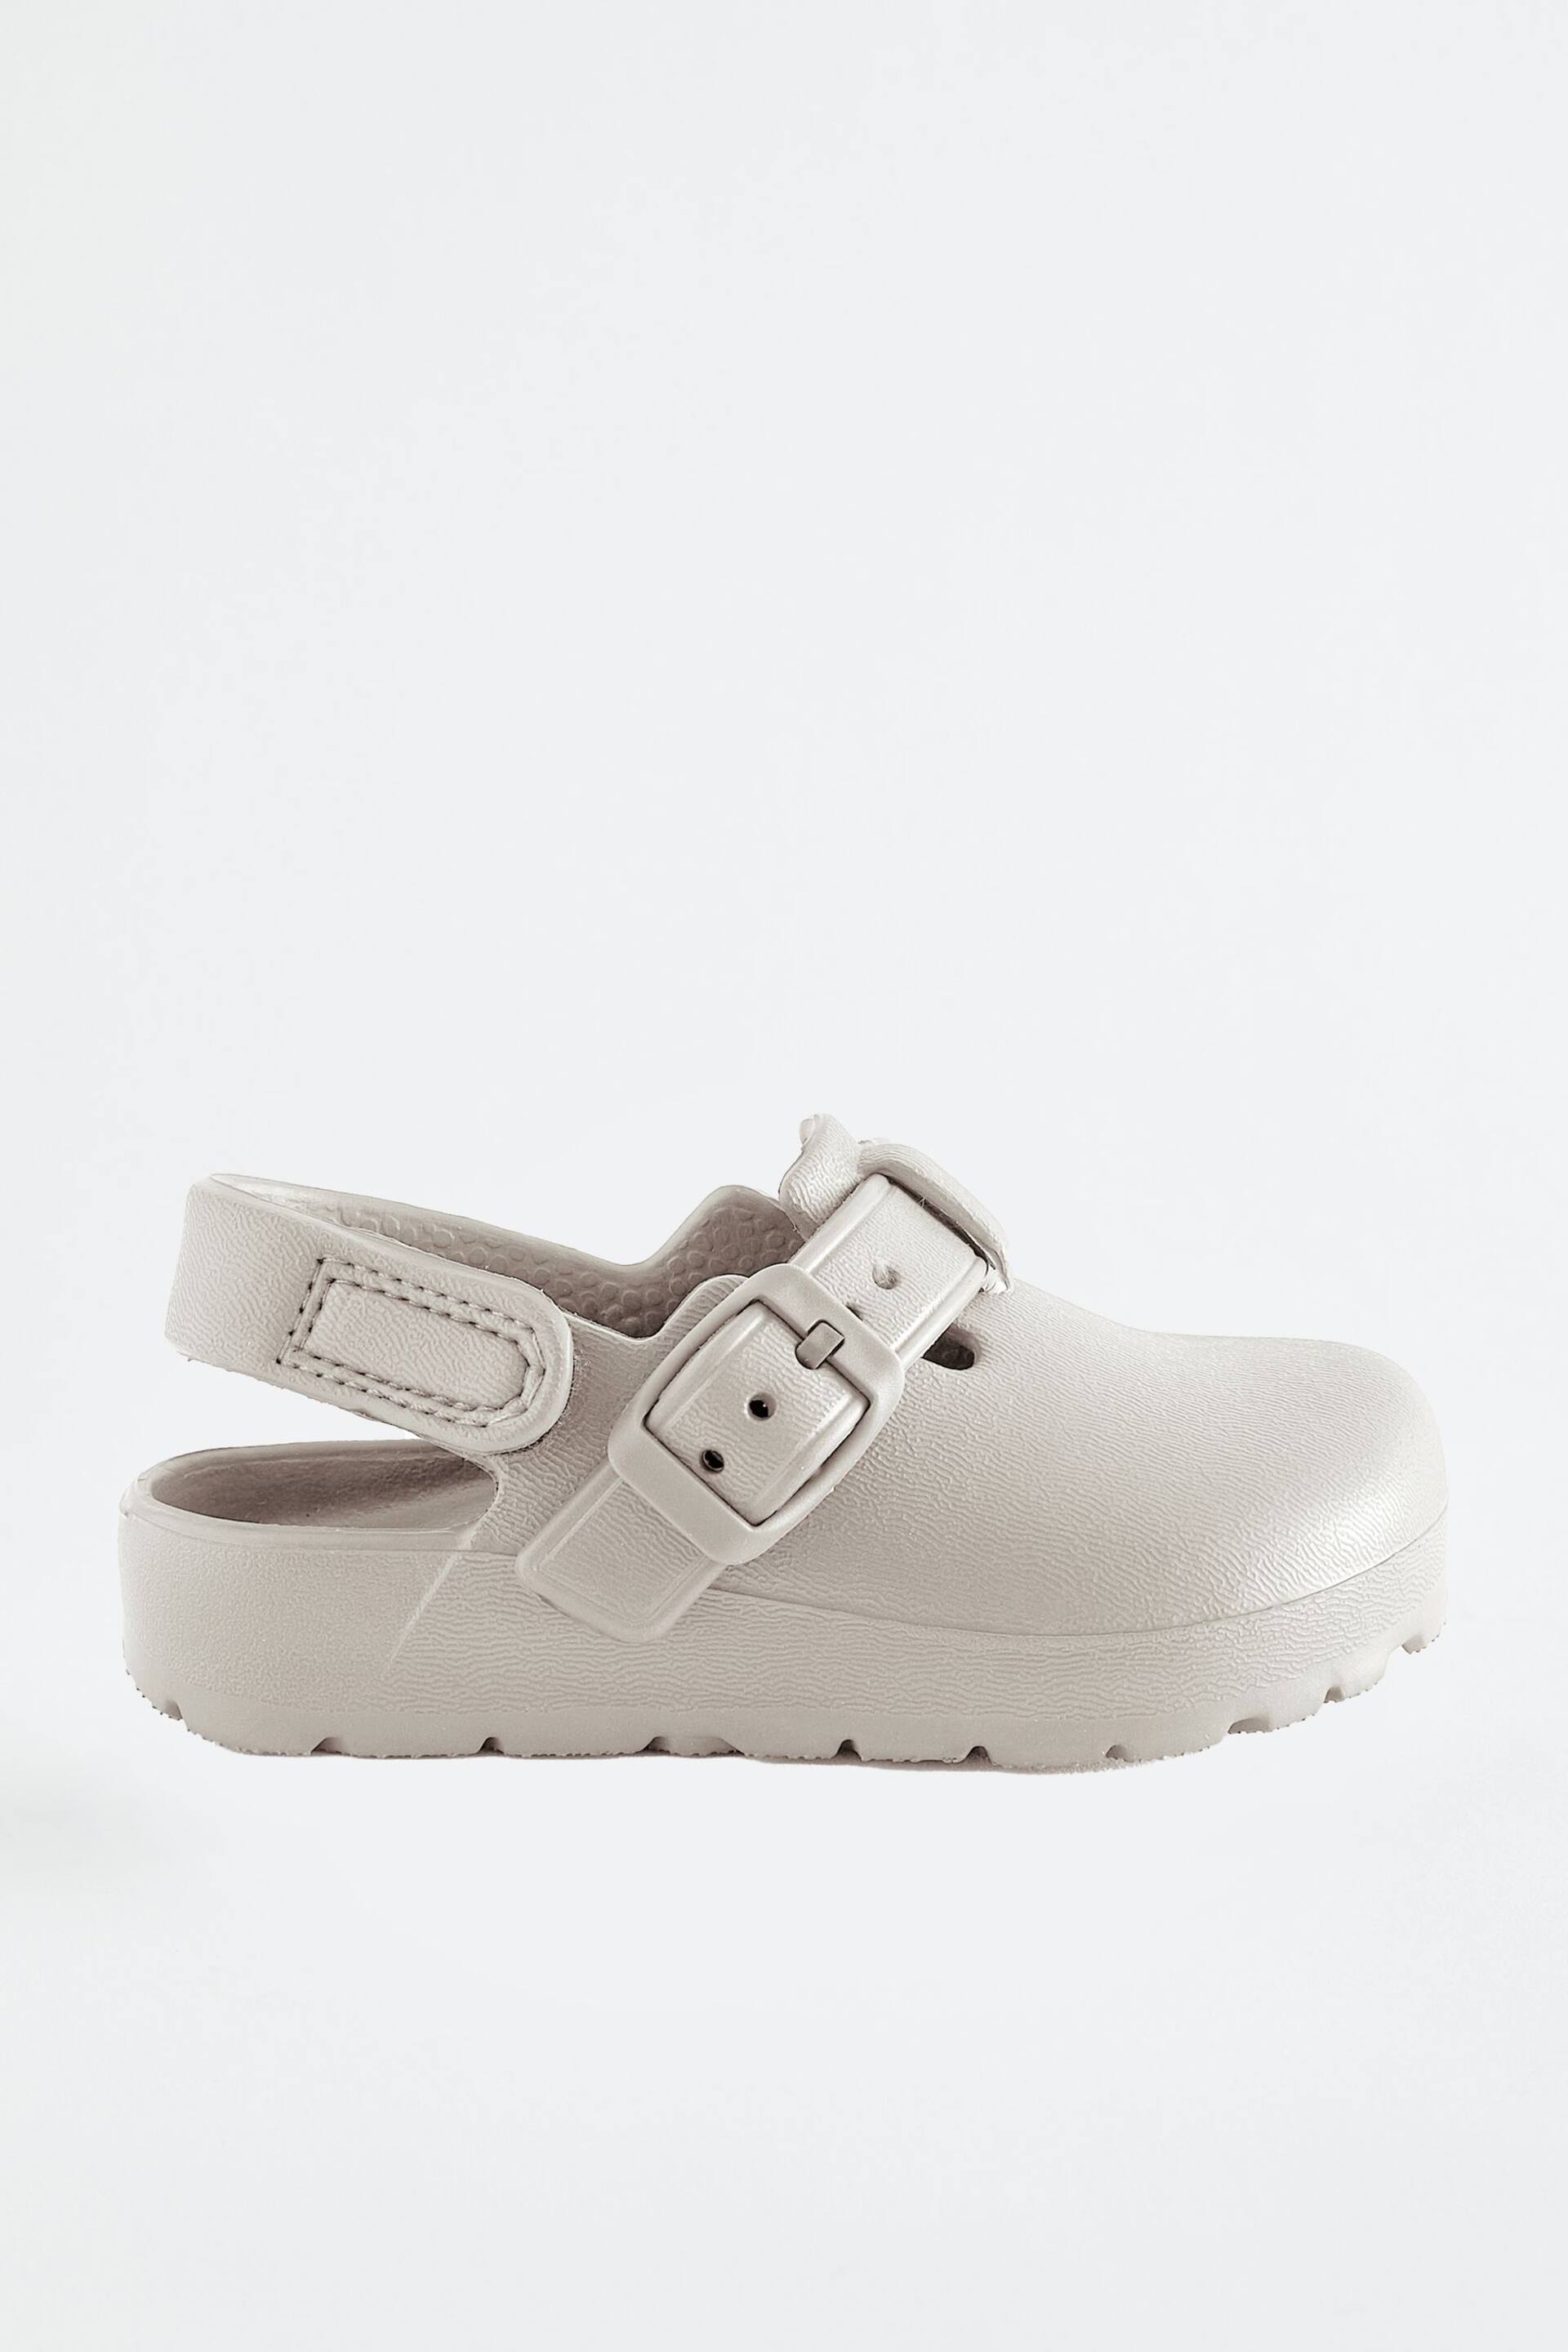 Neutral Buckle Clogs - Image 2 of 7